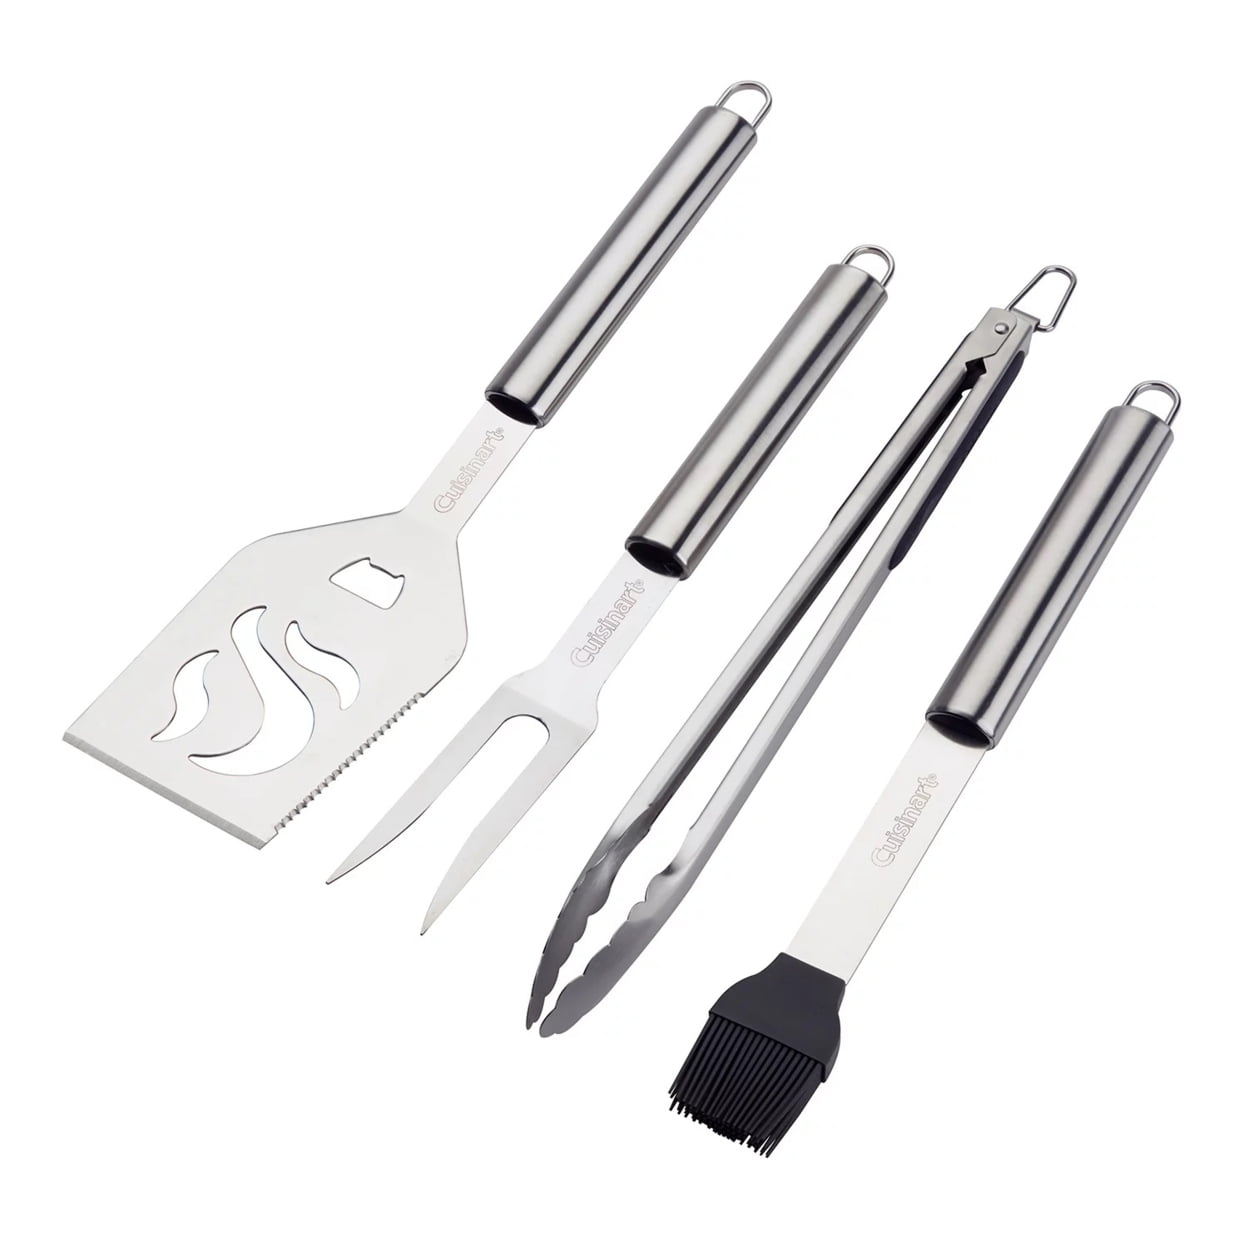 Cuisinart 4 Pc Stainless Steel Shears Set - BRAND NEW - household items -  by owner - housewares sale - craigslist